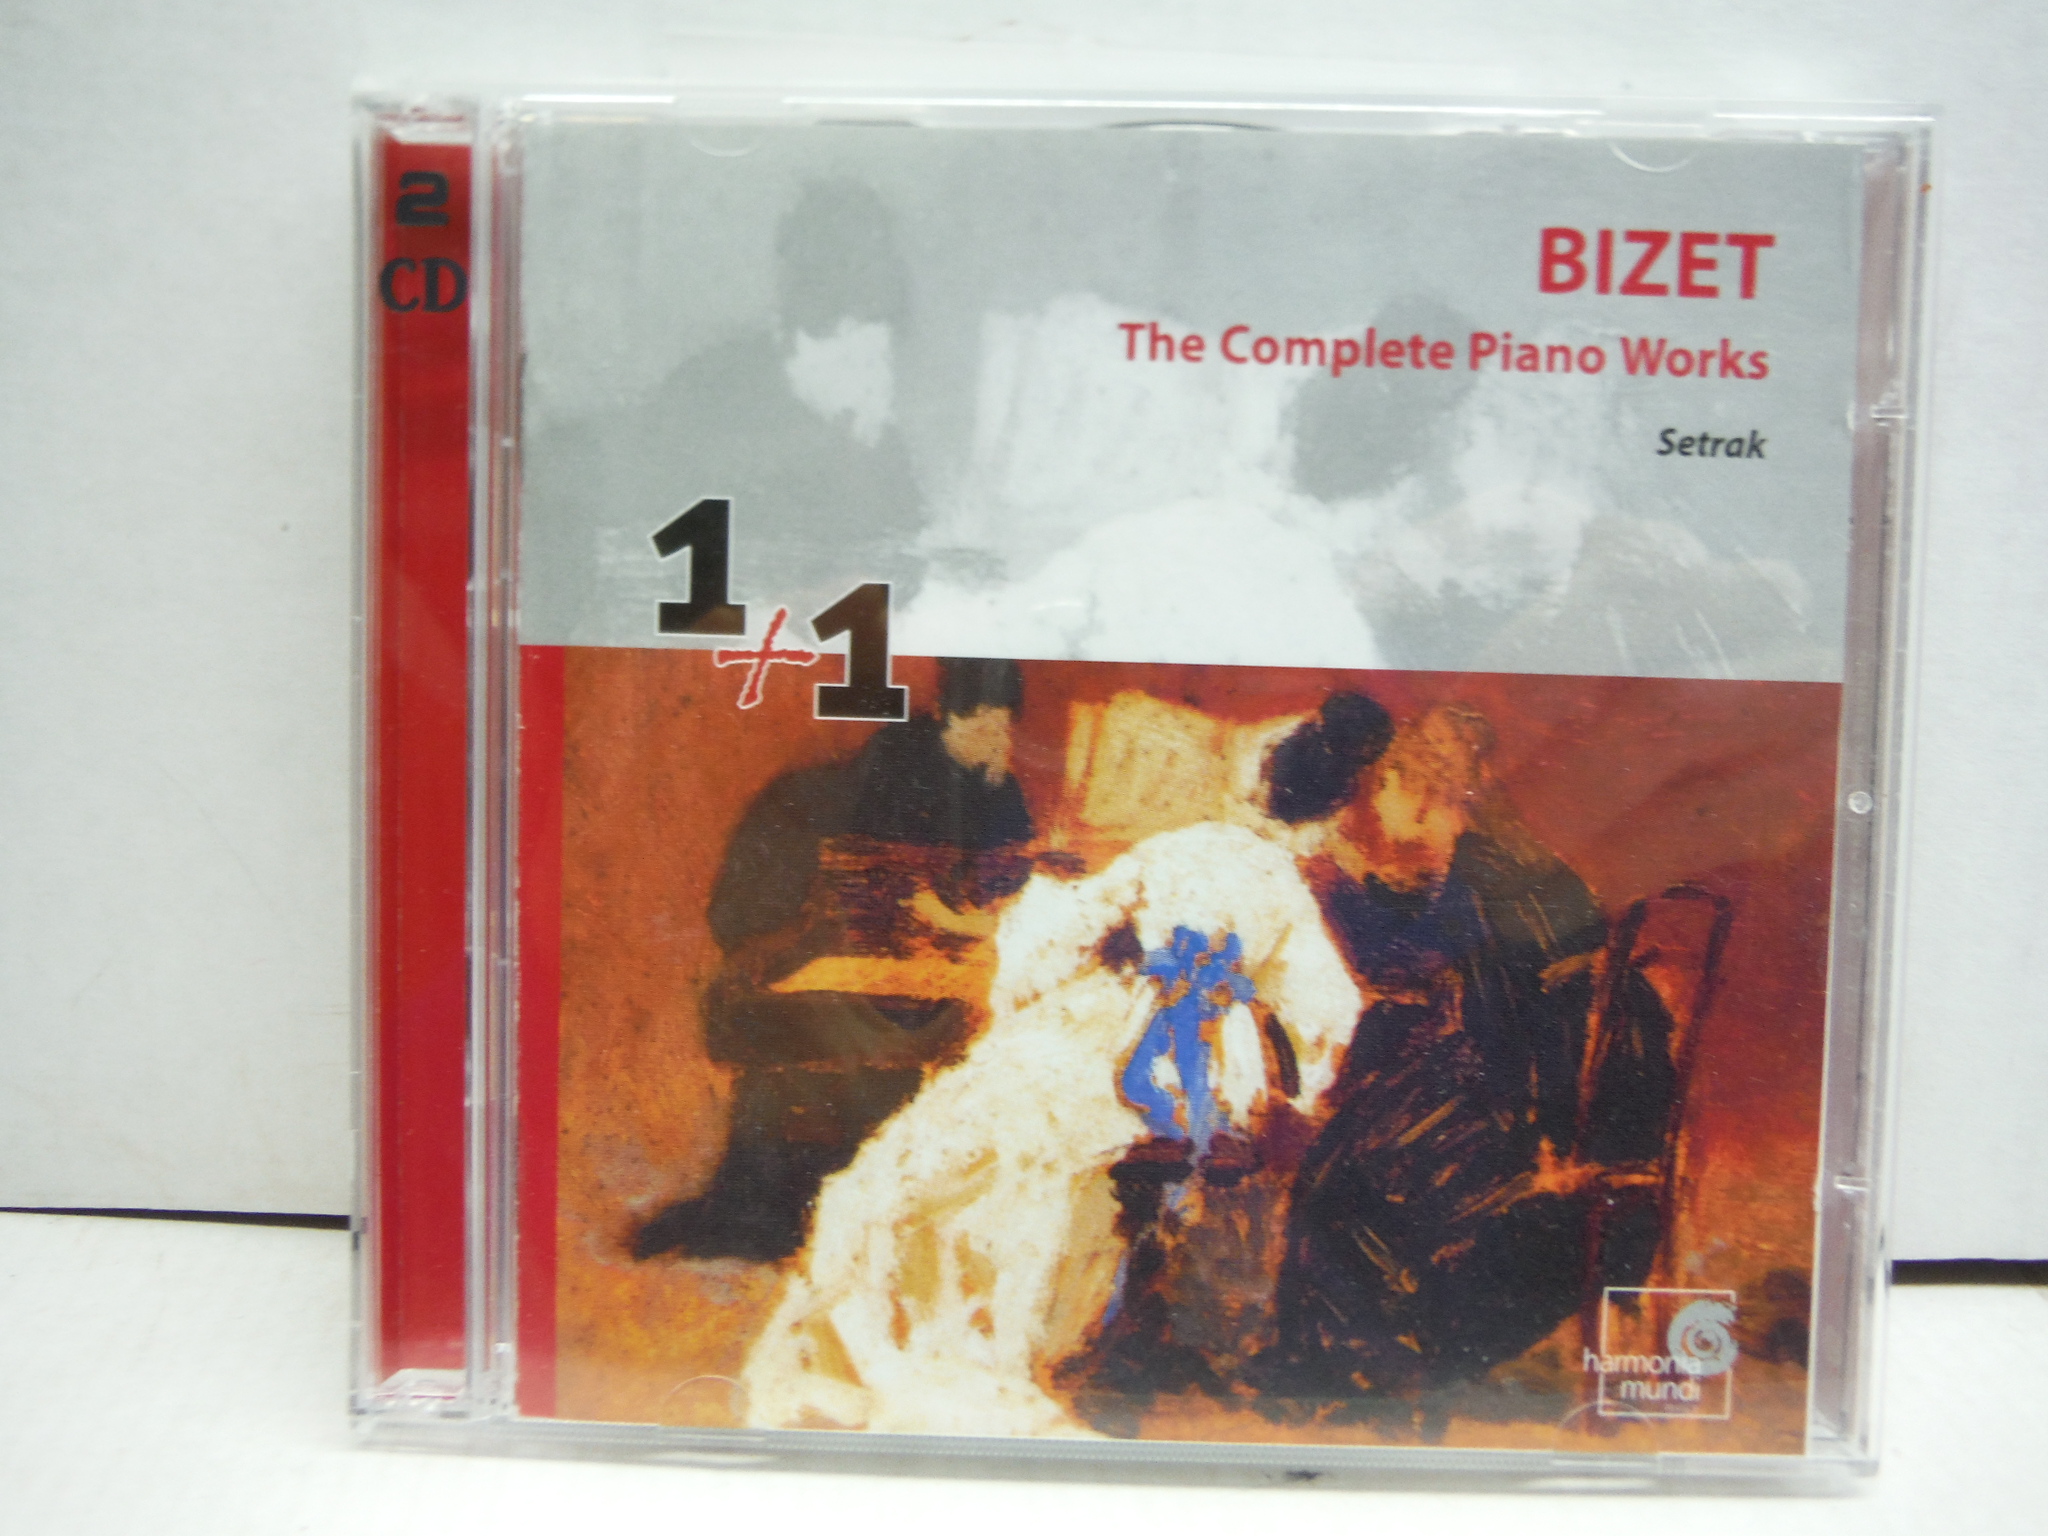 Bizet: The Complete Piano Works